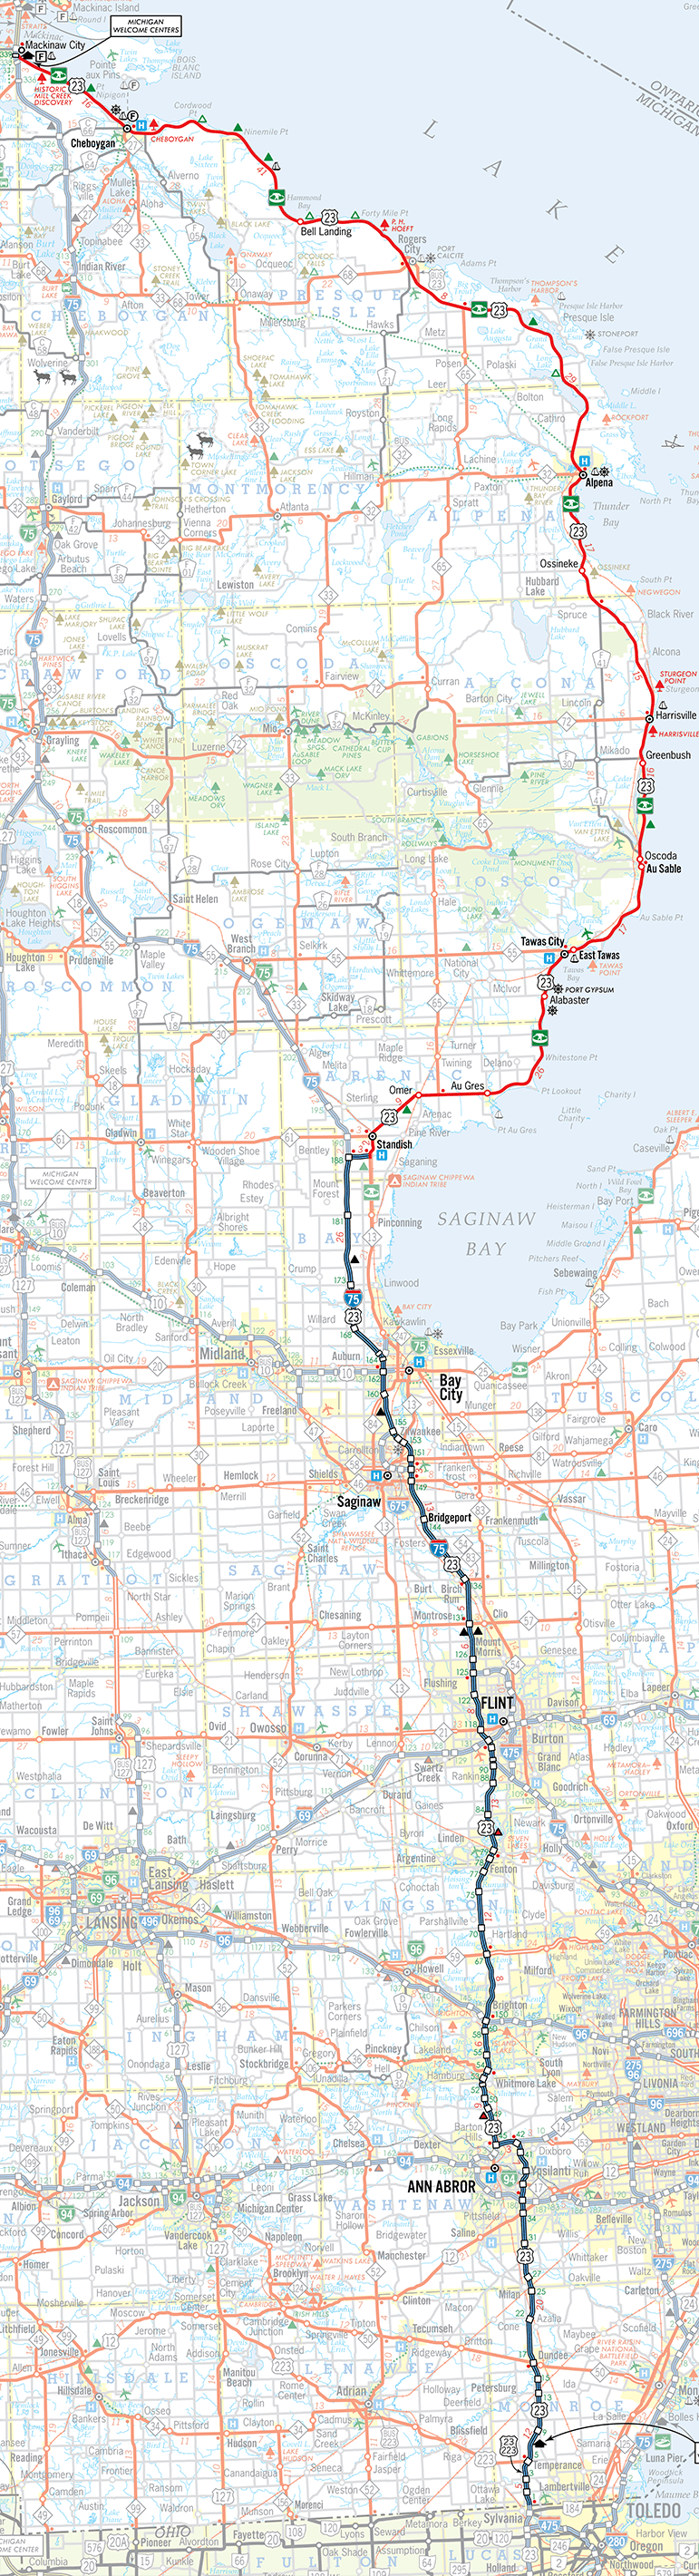 US-23 Route Map